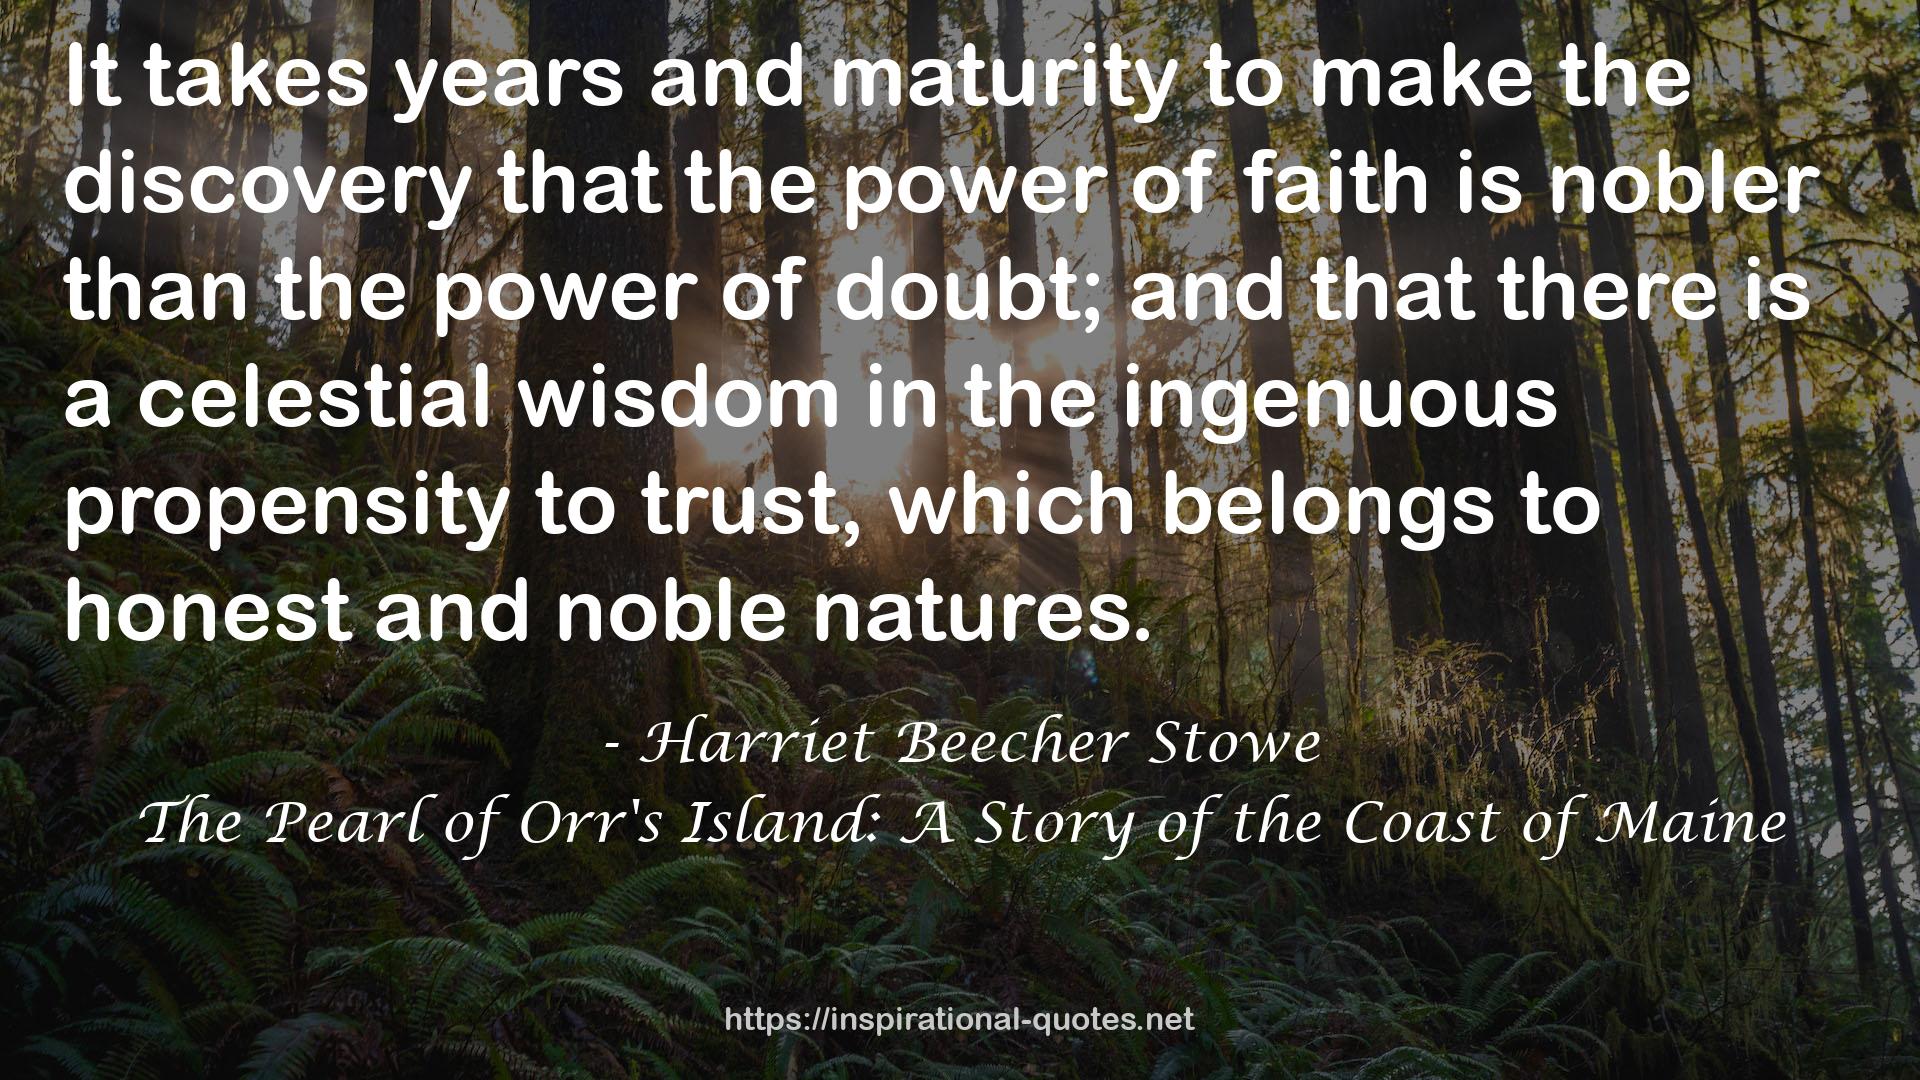 The Pearl of Orr's Island: A Story of the Coast of Maine QUOTES